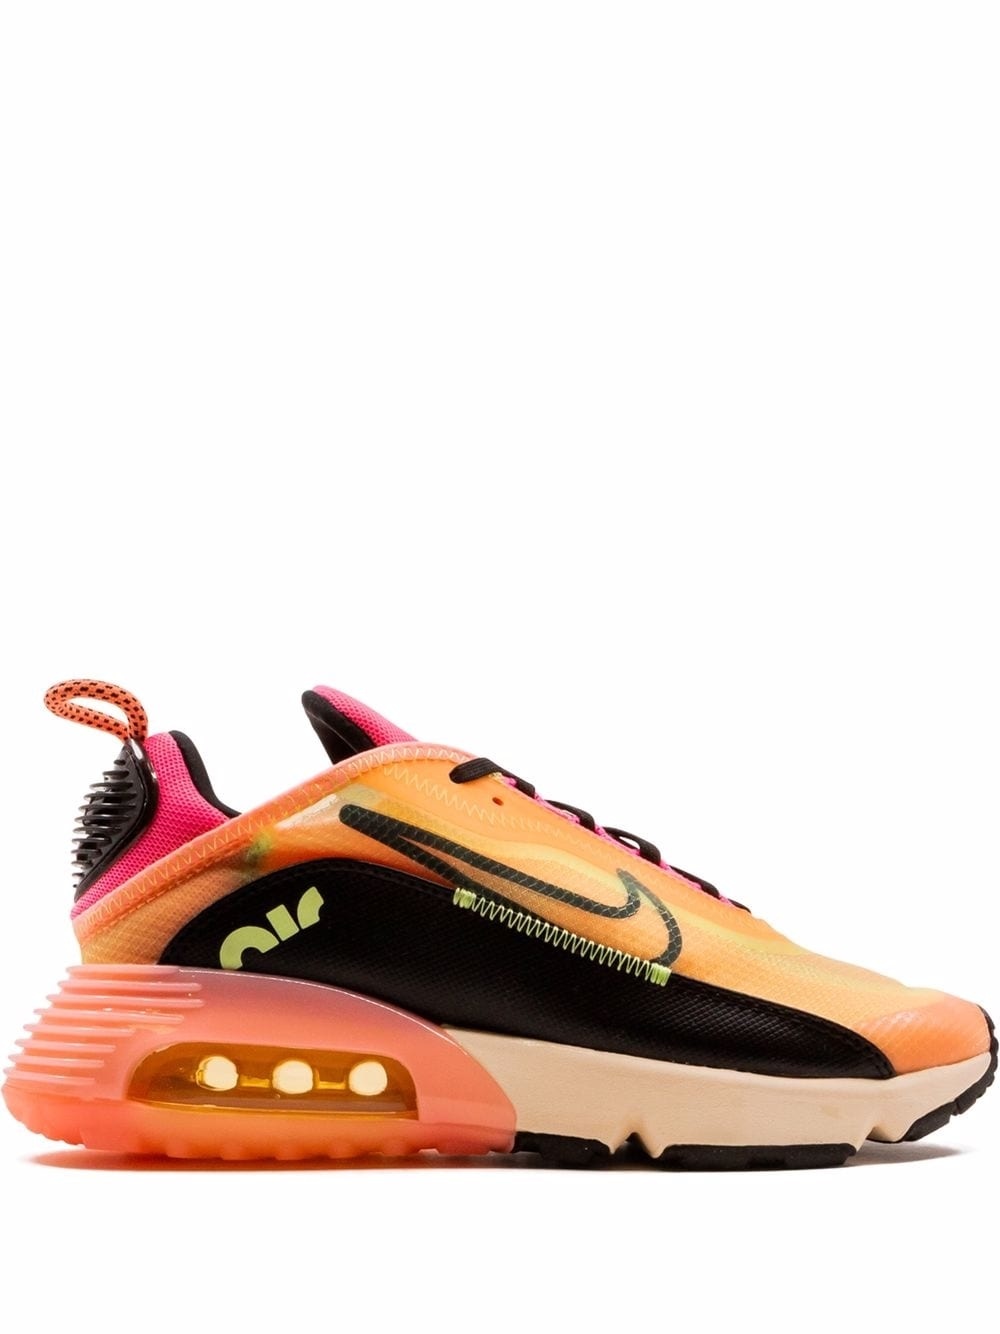 Air Max 2090 "Neon Highlighter" sneakers - 1